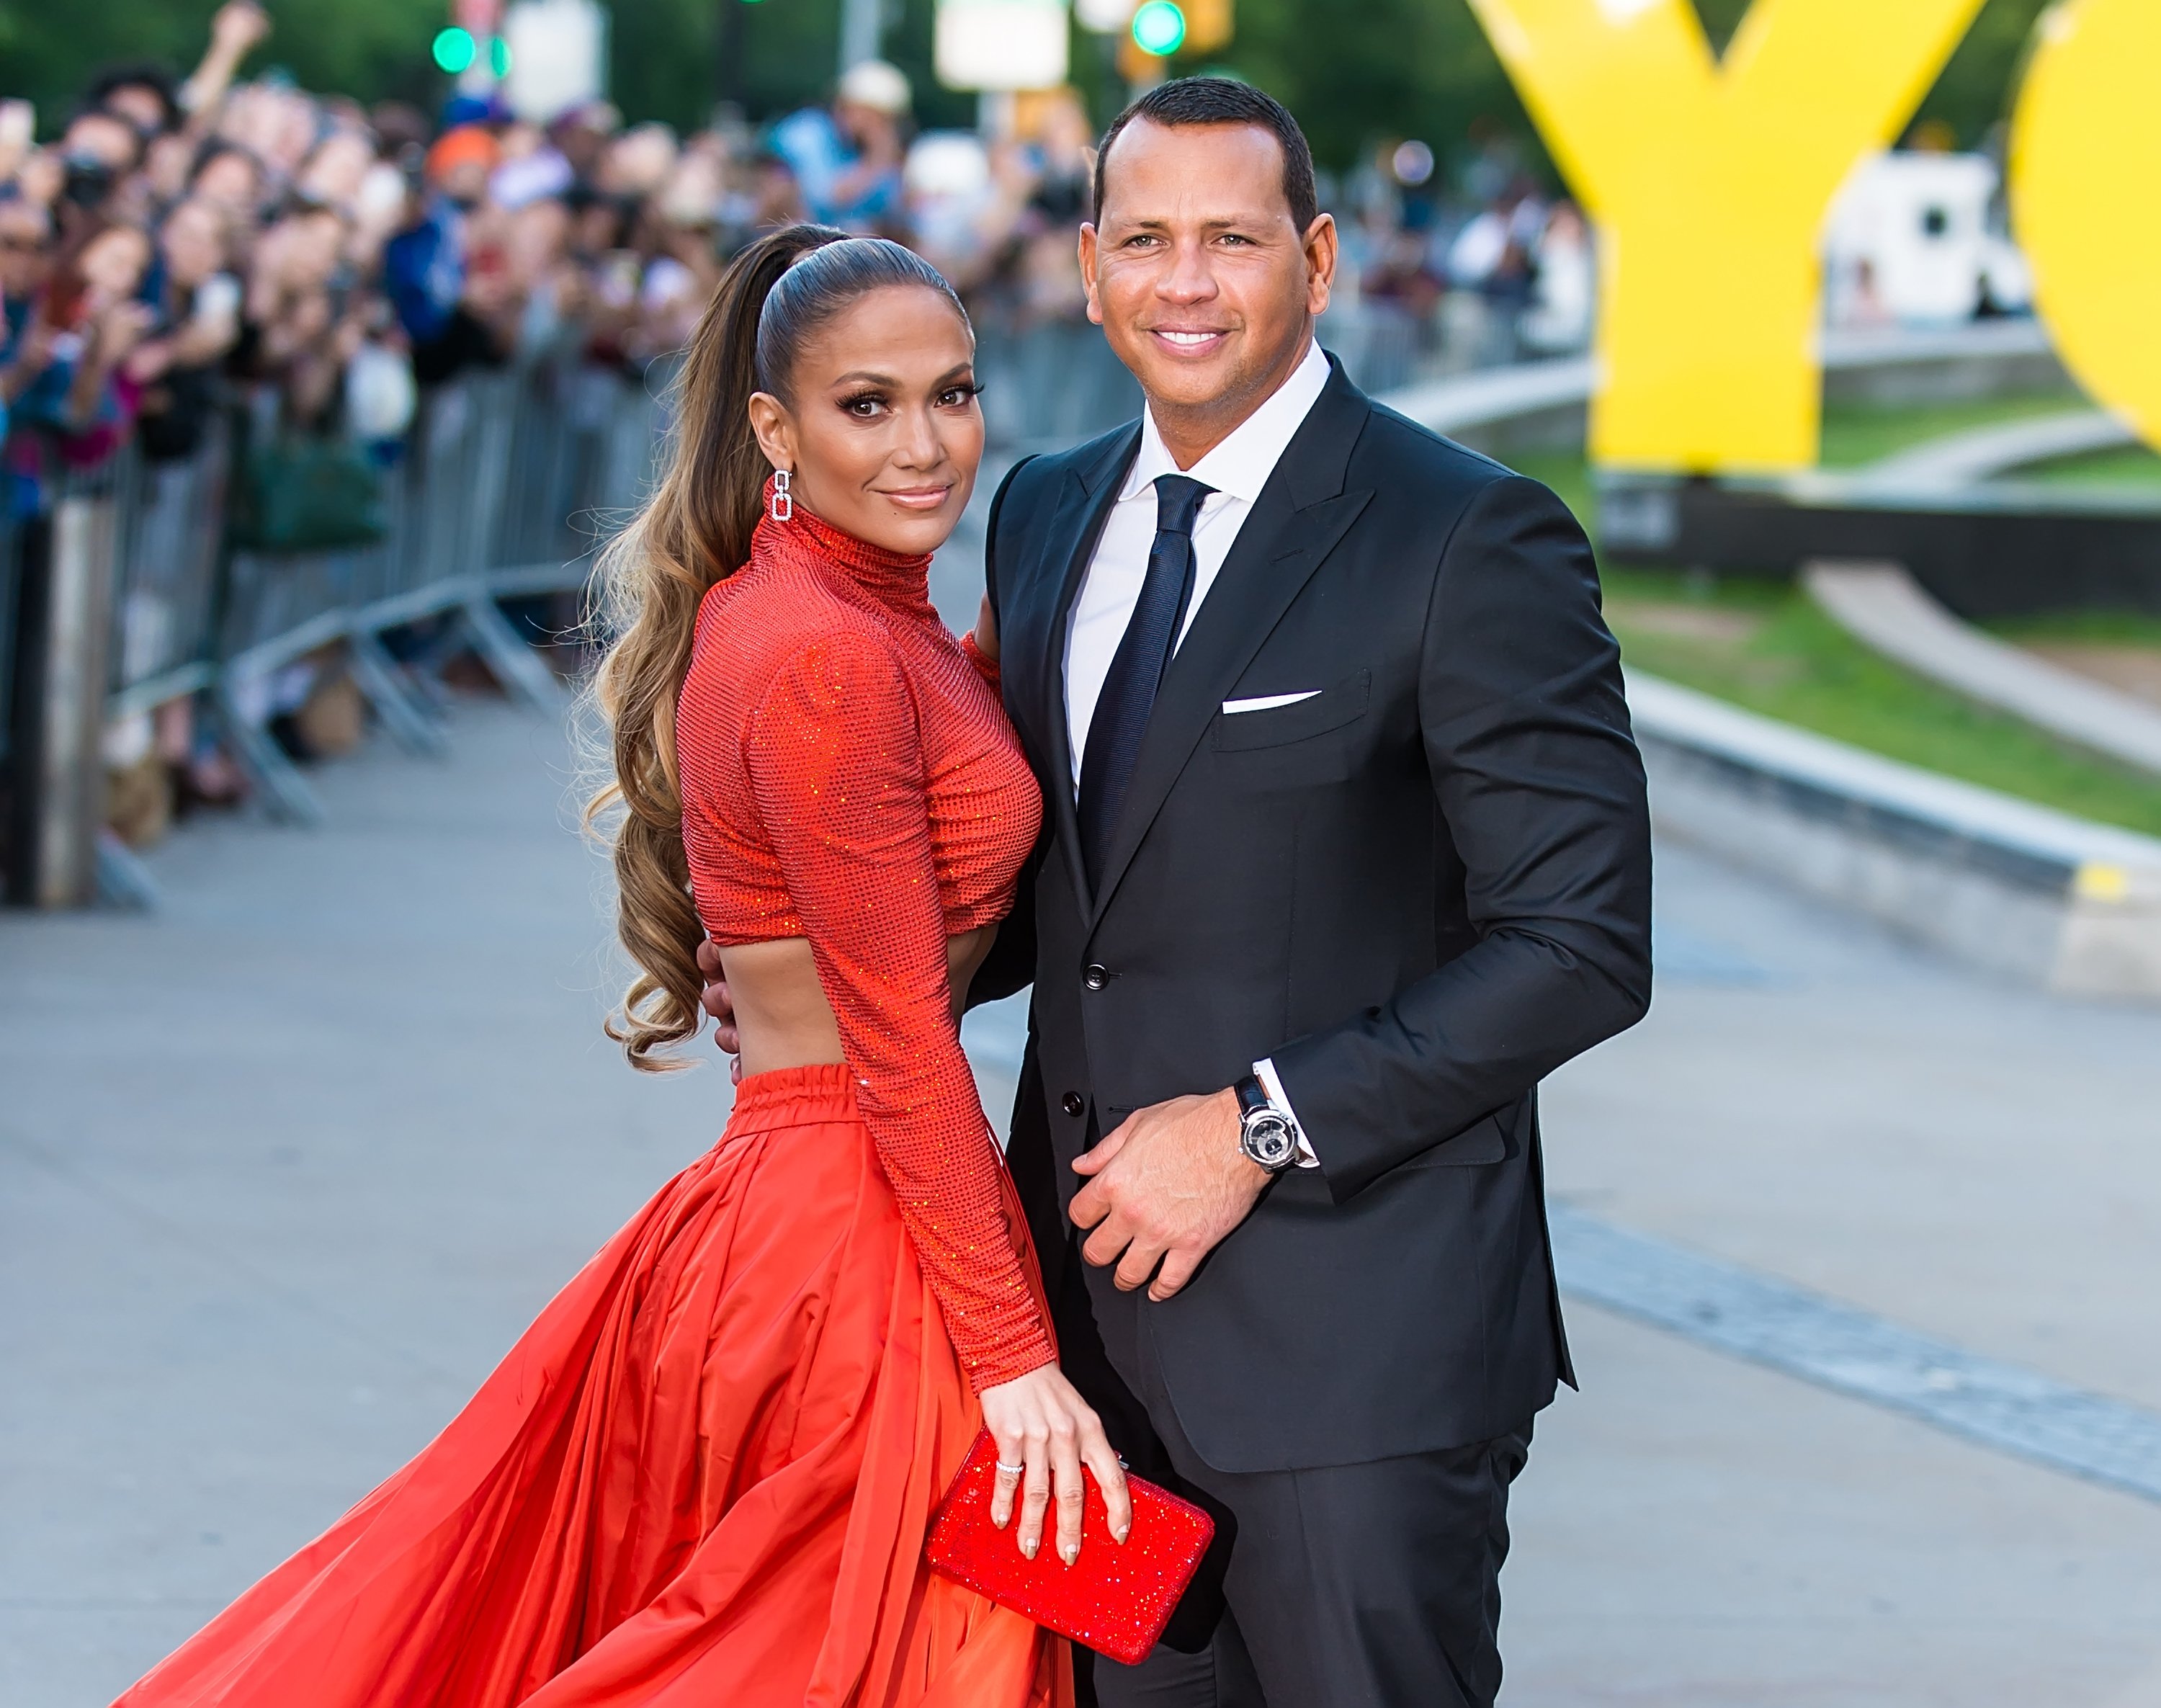 Jennifer Lopez and Alex Rodriguez arriving to the 2019 CFDA Fashion Awards on June 3, 2019, in New York City. | Source: Getty Images.